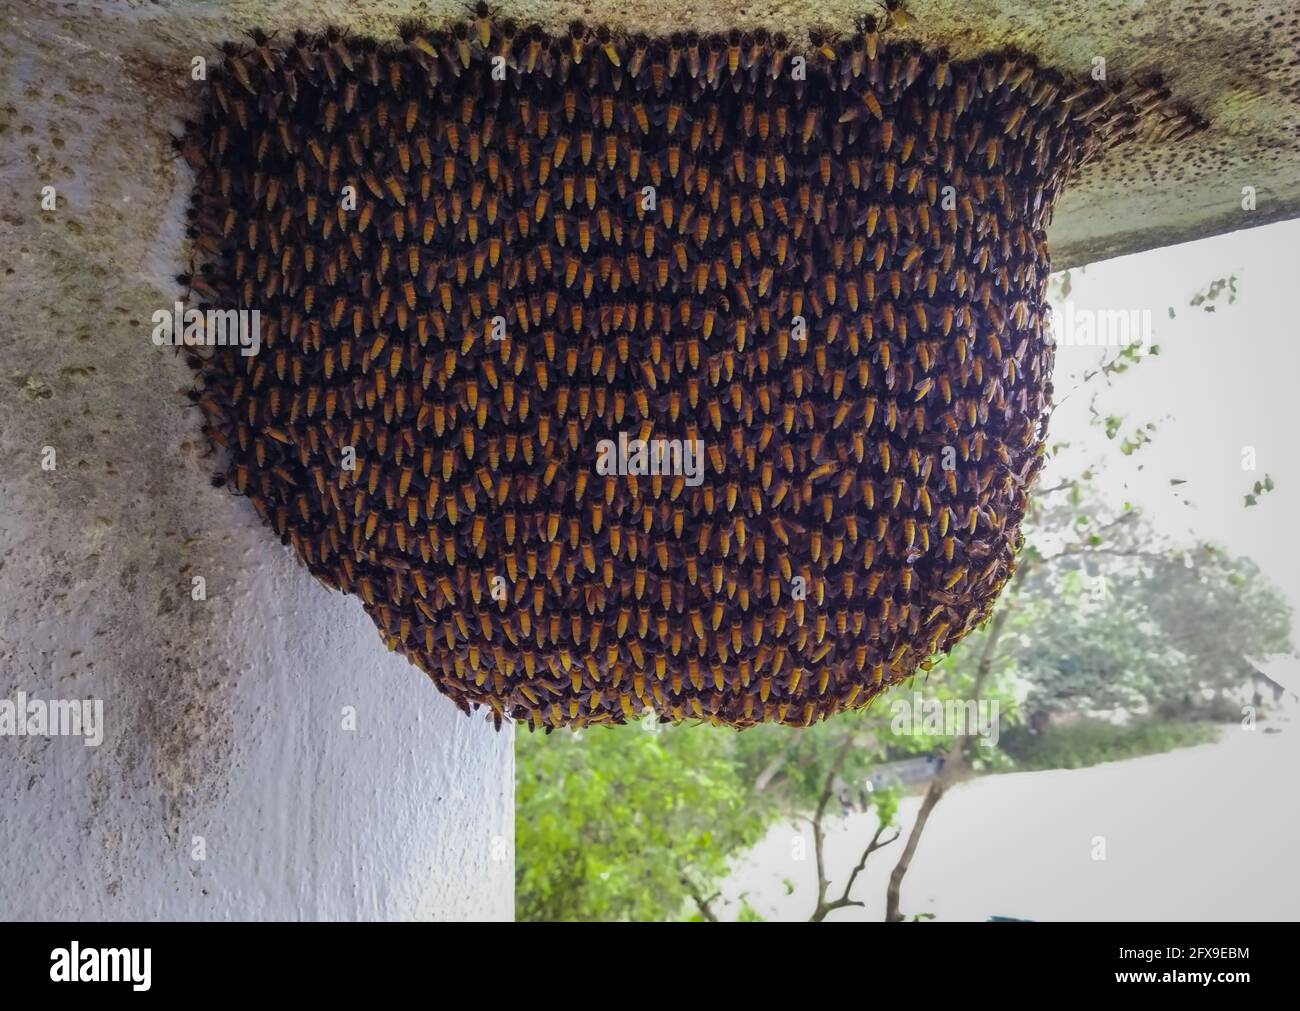 Big Wild Honeybee Beehive On A Ceiling Of A Building Stock Photo - Alamy